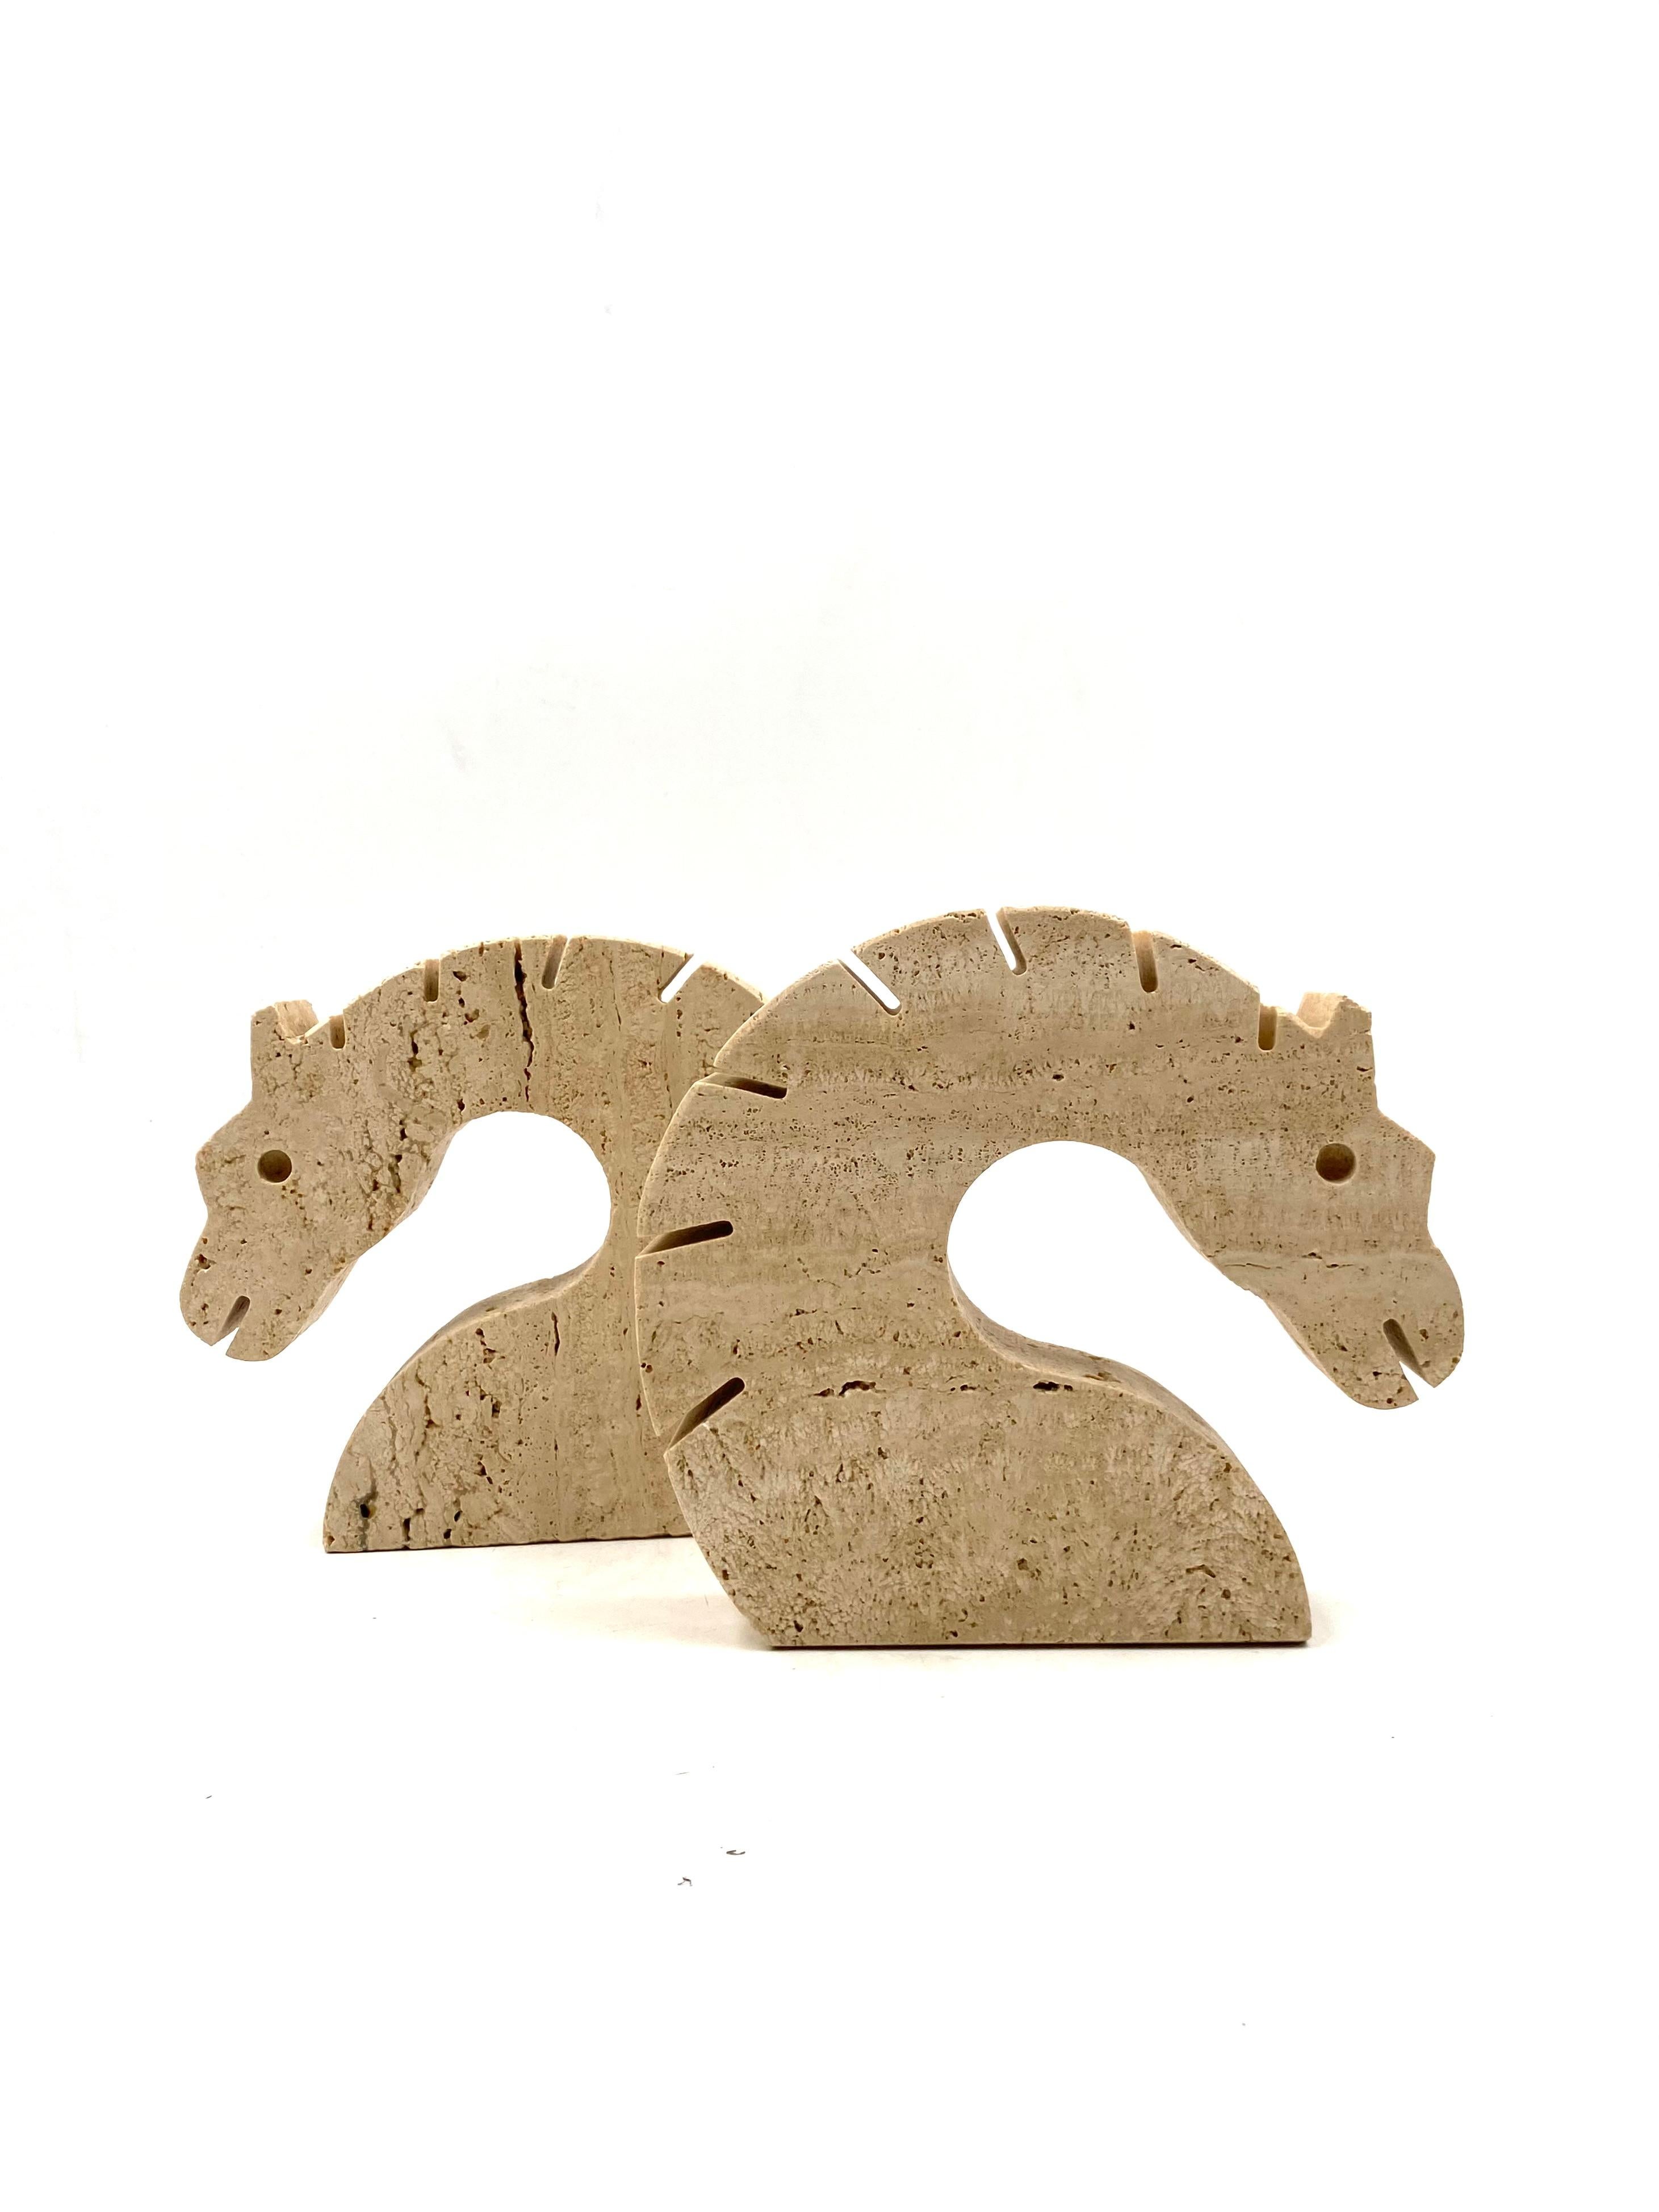 Italian Brutalist Horses / Dragons Travertine Bookends, Fratelli Mannelli, Italy, 1970s For Sale